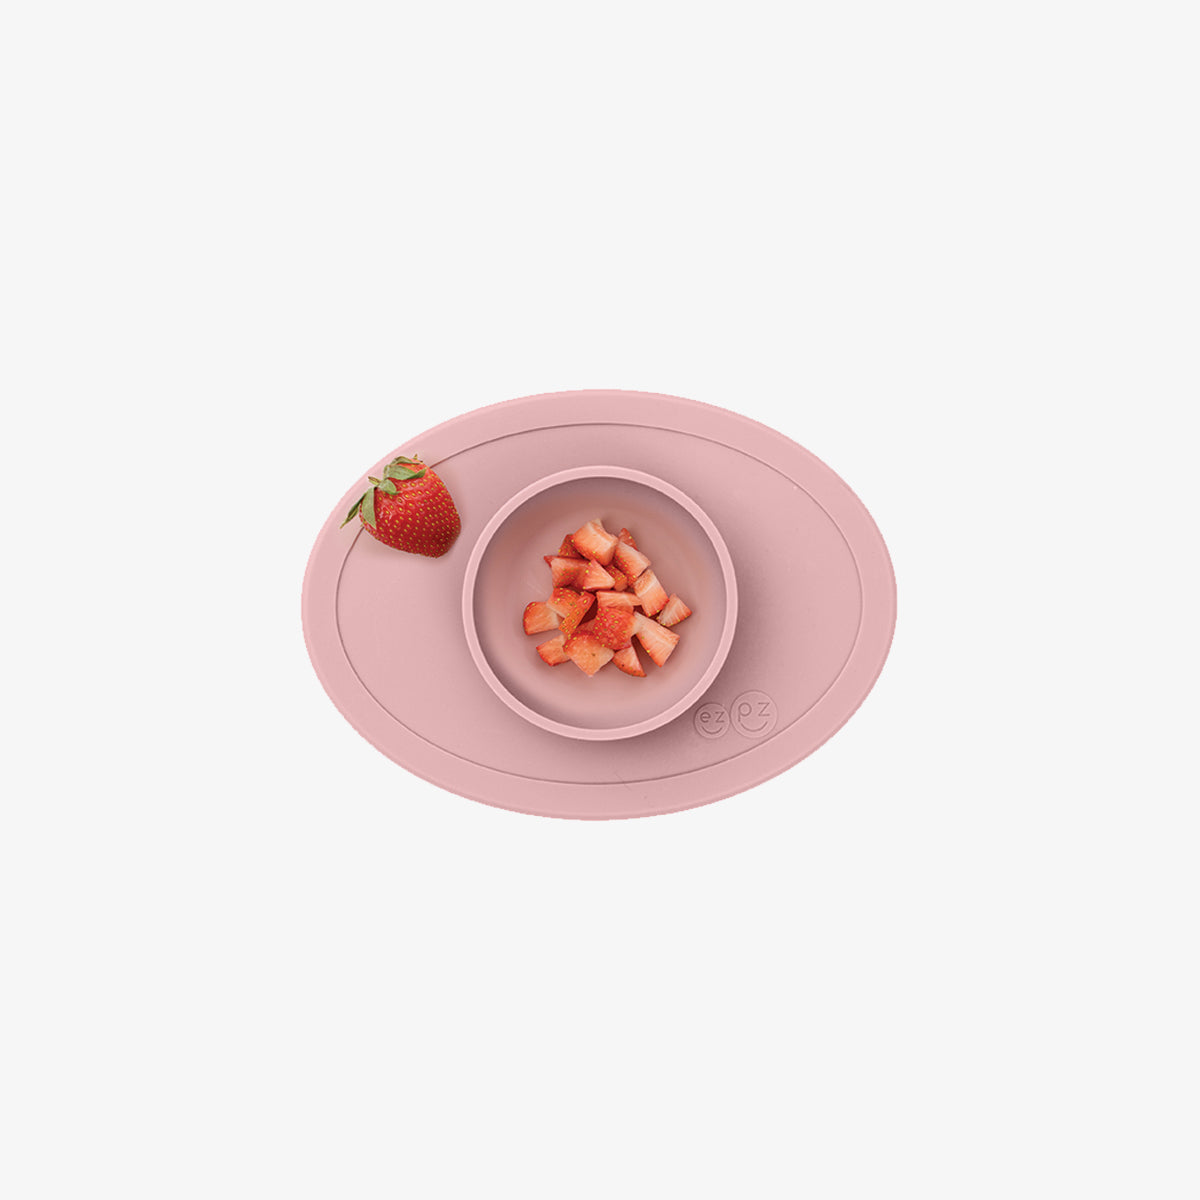 The Tiny Bowl in Blush by ezpz / Silicone Bowl for Babies that Fits on High Chairs